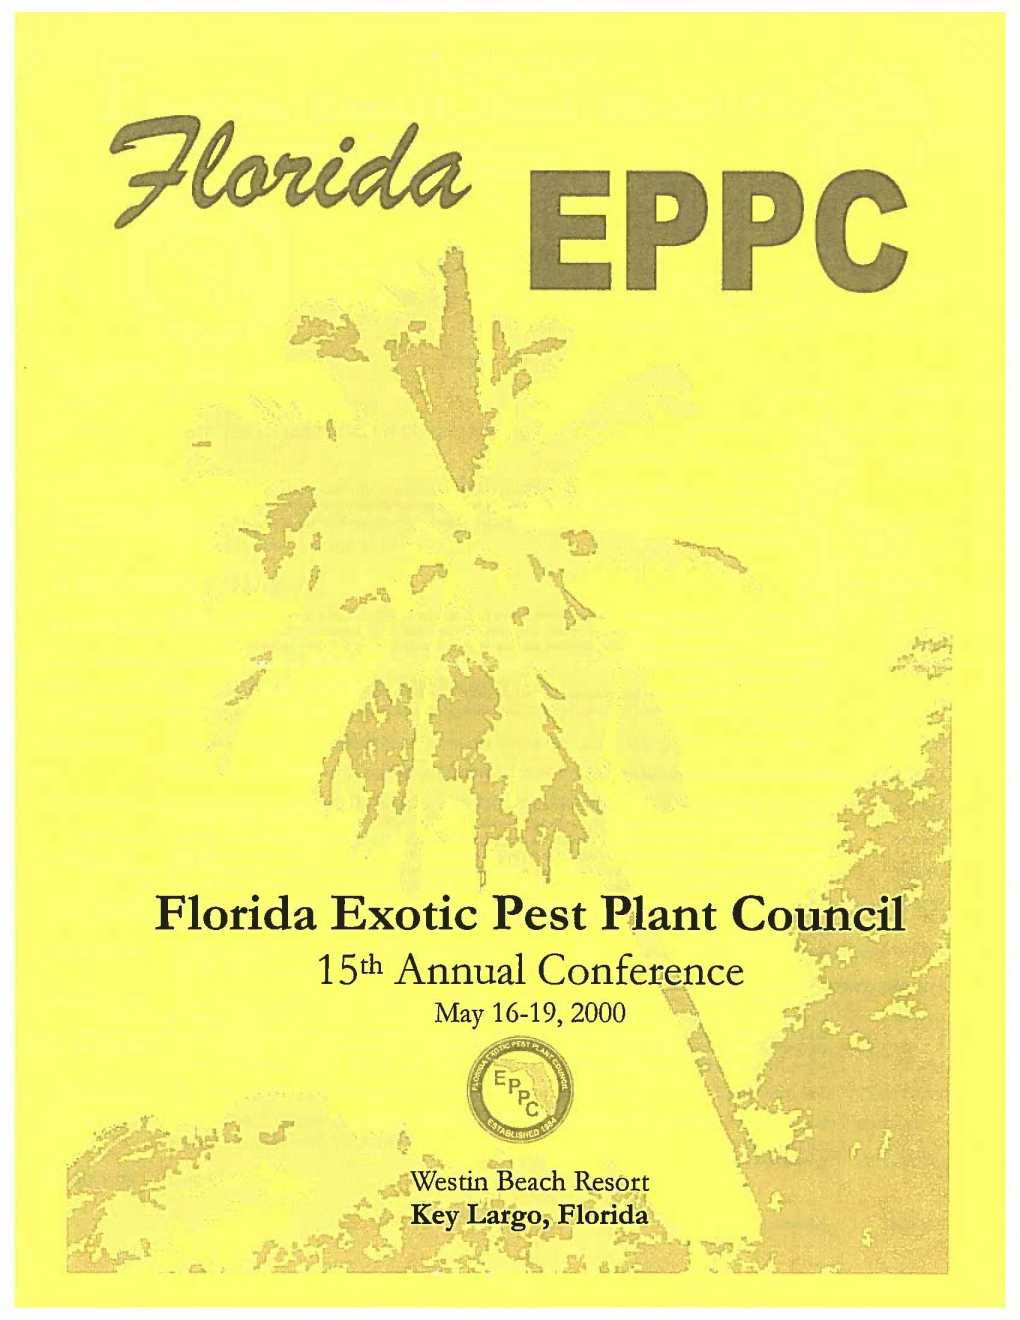 Florida Exotic Pest ~Lant Councll 1 Th 15 Annual Confenctnce